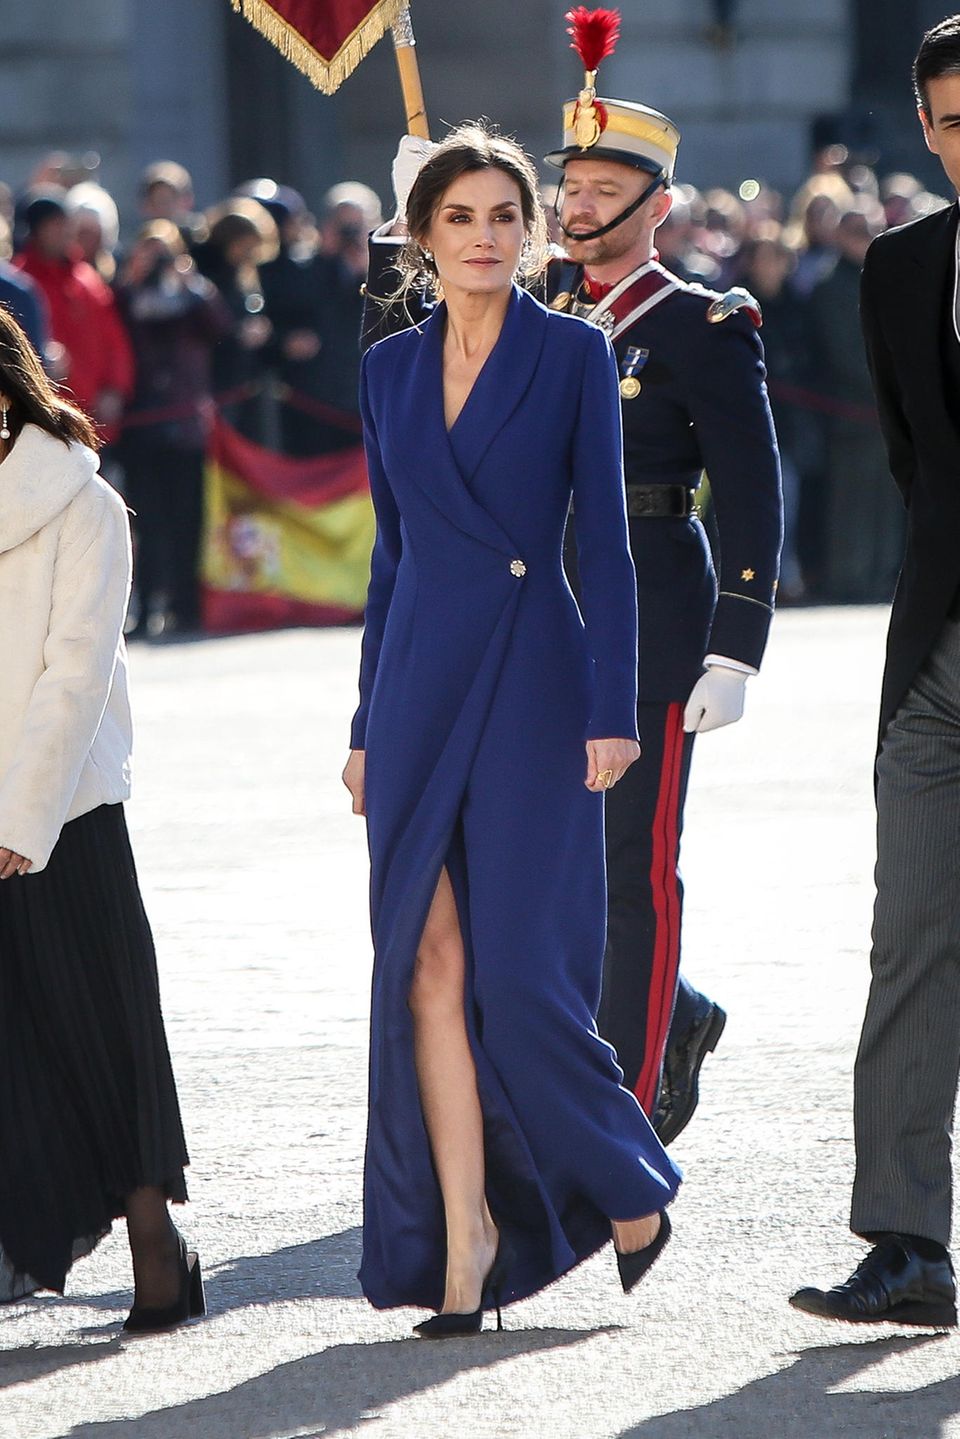 Letizia in an elegant suit dress at the New Year's military parade in Madrid in January 2020